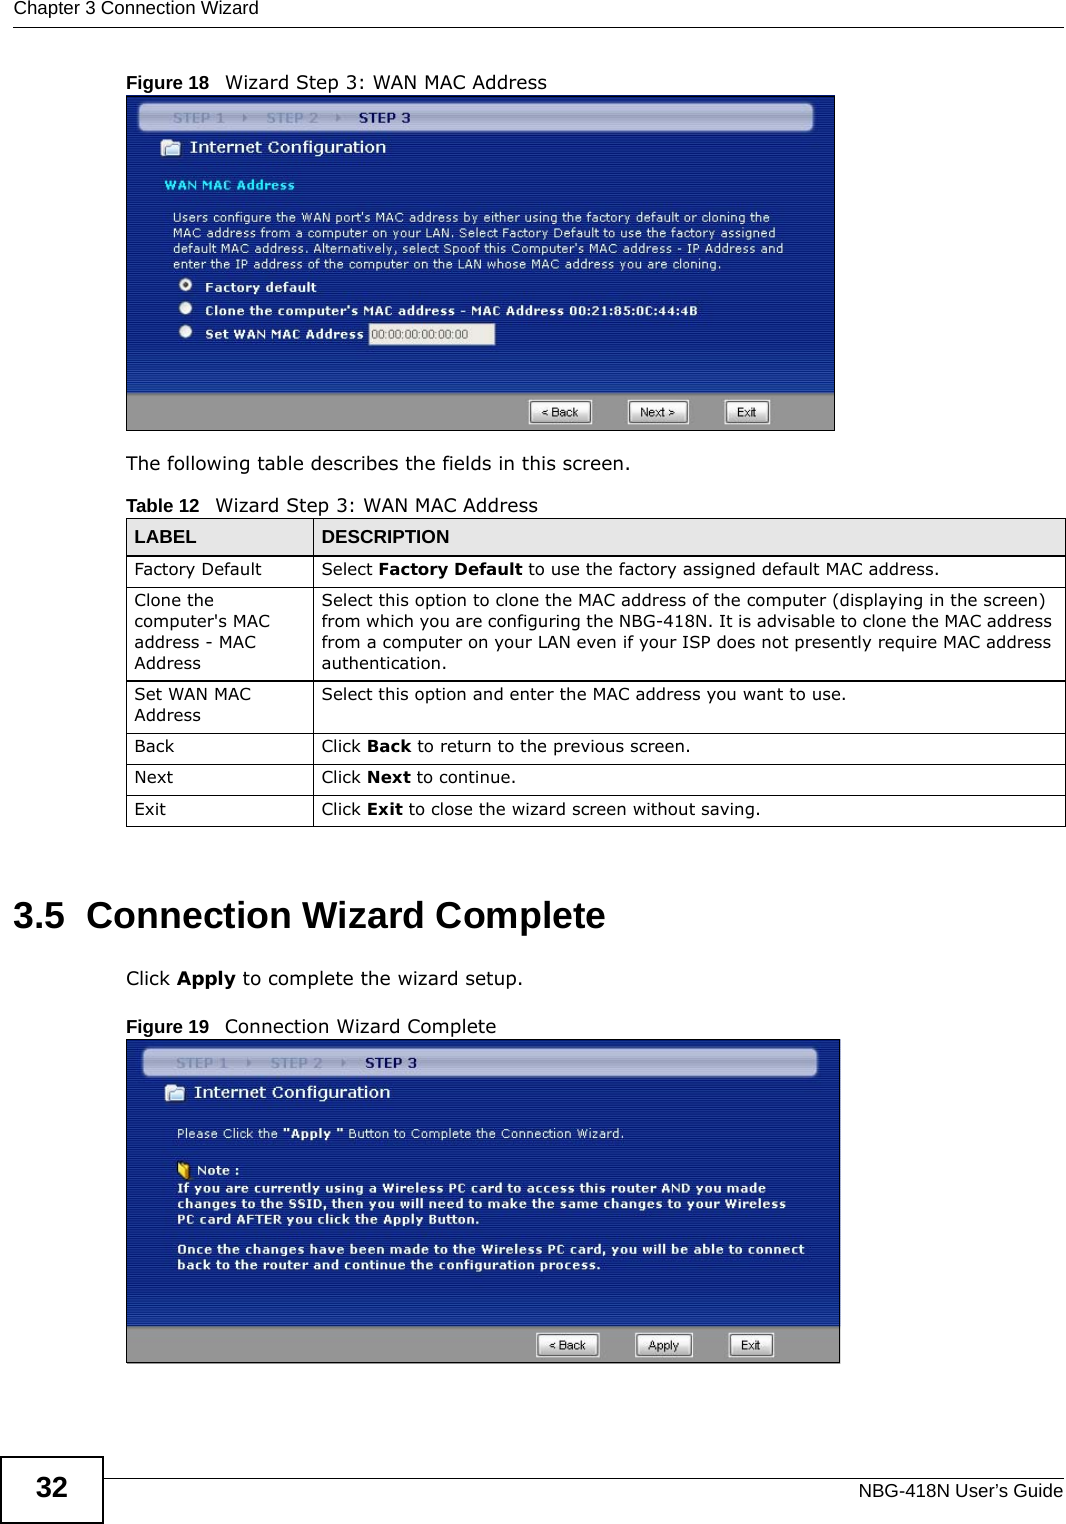 Chapter 3 Connection WizardNBG-418N User’s Guide32Figure 18   Wizard Step 3: WAN MAC AddressThe following table describes the fields in this screen.3.5  Connection Wizard CompleteClick Apply to complete the wizard setup.Figure 19   Connection Wizard CompleteTable 12   Wizard Step 3: WAN MAC AddressLABEL DESCRIPTIONFactory Default Select Factory Default to use the factory assigned default MAC address.Clone the computer&apos;s MAC address - MAC AddressSelect this option to clone the MAC address of the computer (displaying in the screen) from which you are configuring the NBG-418N. It is advisable to clone the MAC address from a computer on your LAN even if your ISP does not presently require MAC address authentication. Set WAN MAC AddressSelect this option and enter the MAC address you want to use.Back Click Back to return to the previous screen.Next Click Next to continue. Exit Click Exit to close the wizard screen without saving.